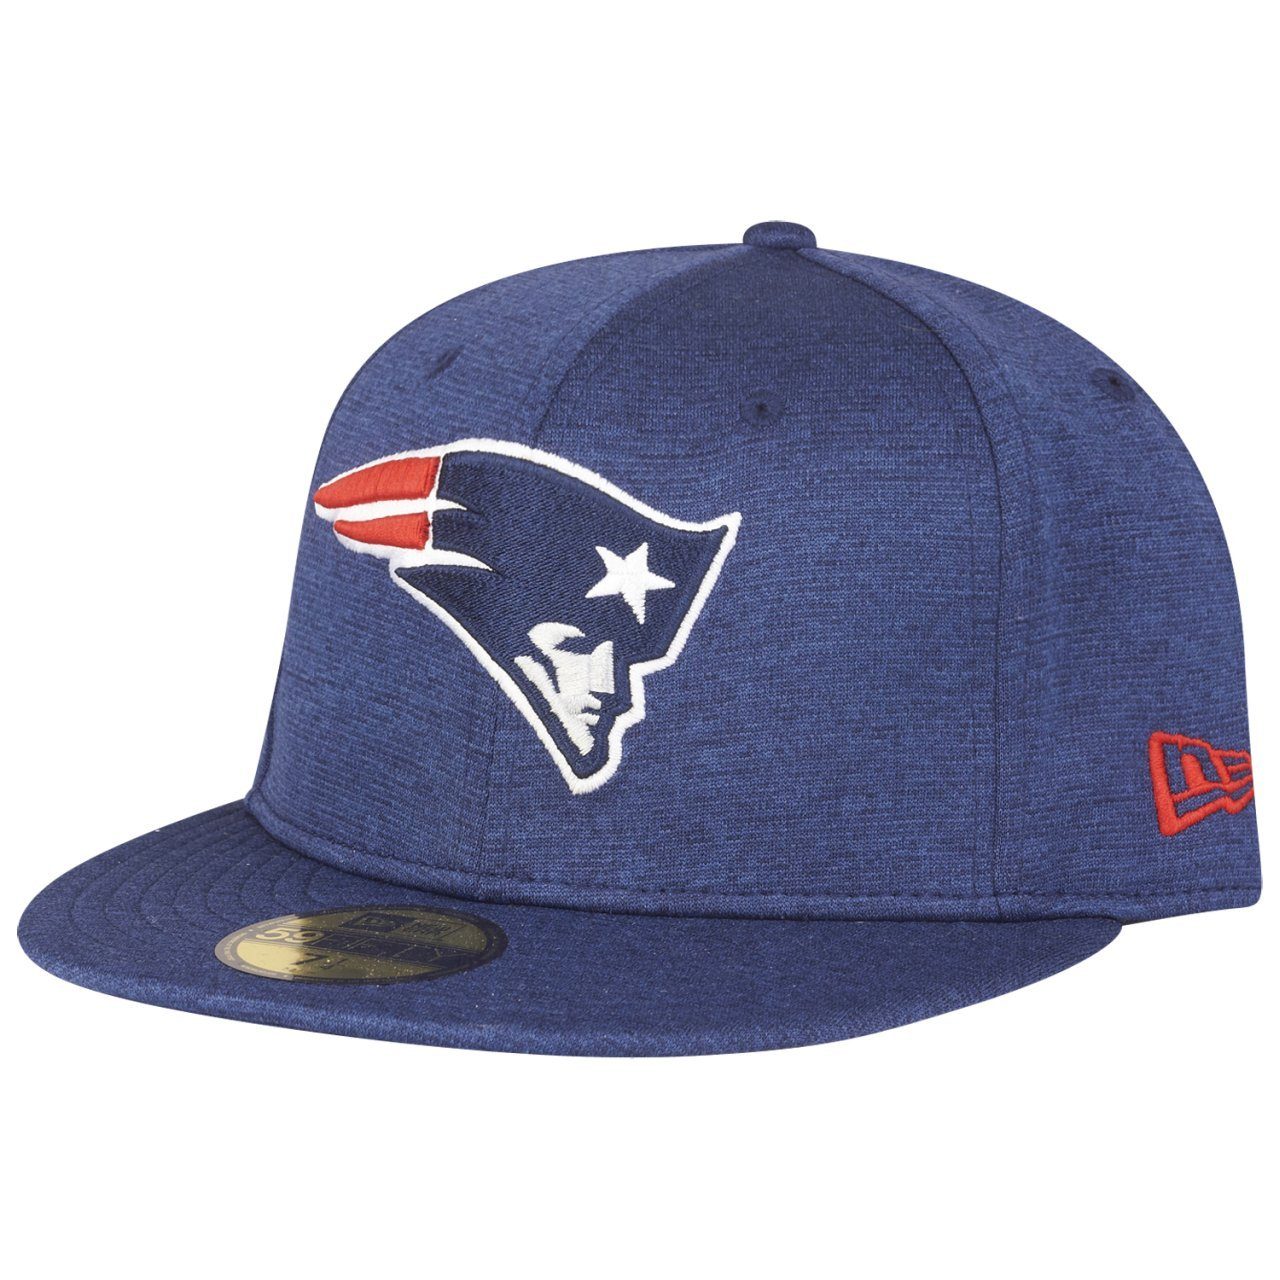 New Era Fitted Cap SHADOW New TECH England 59Fifty Patriots